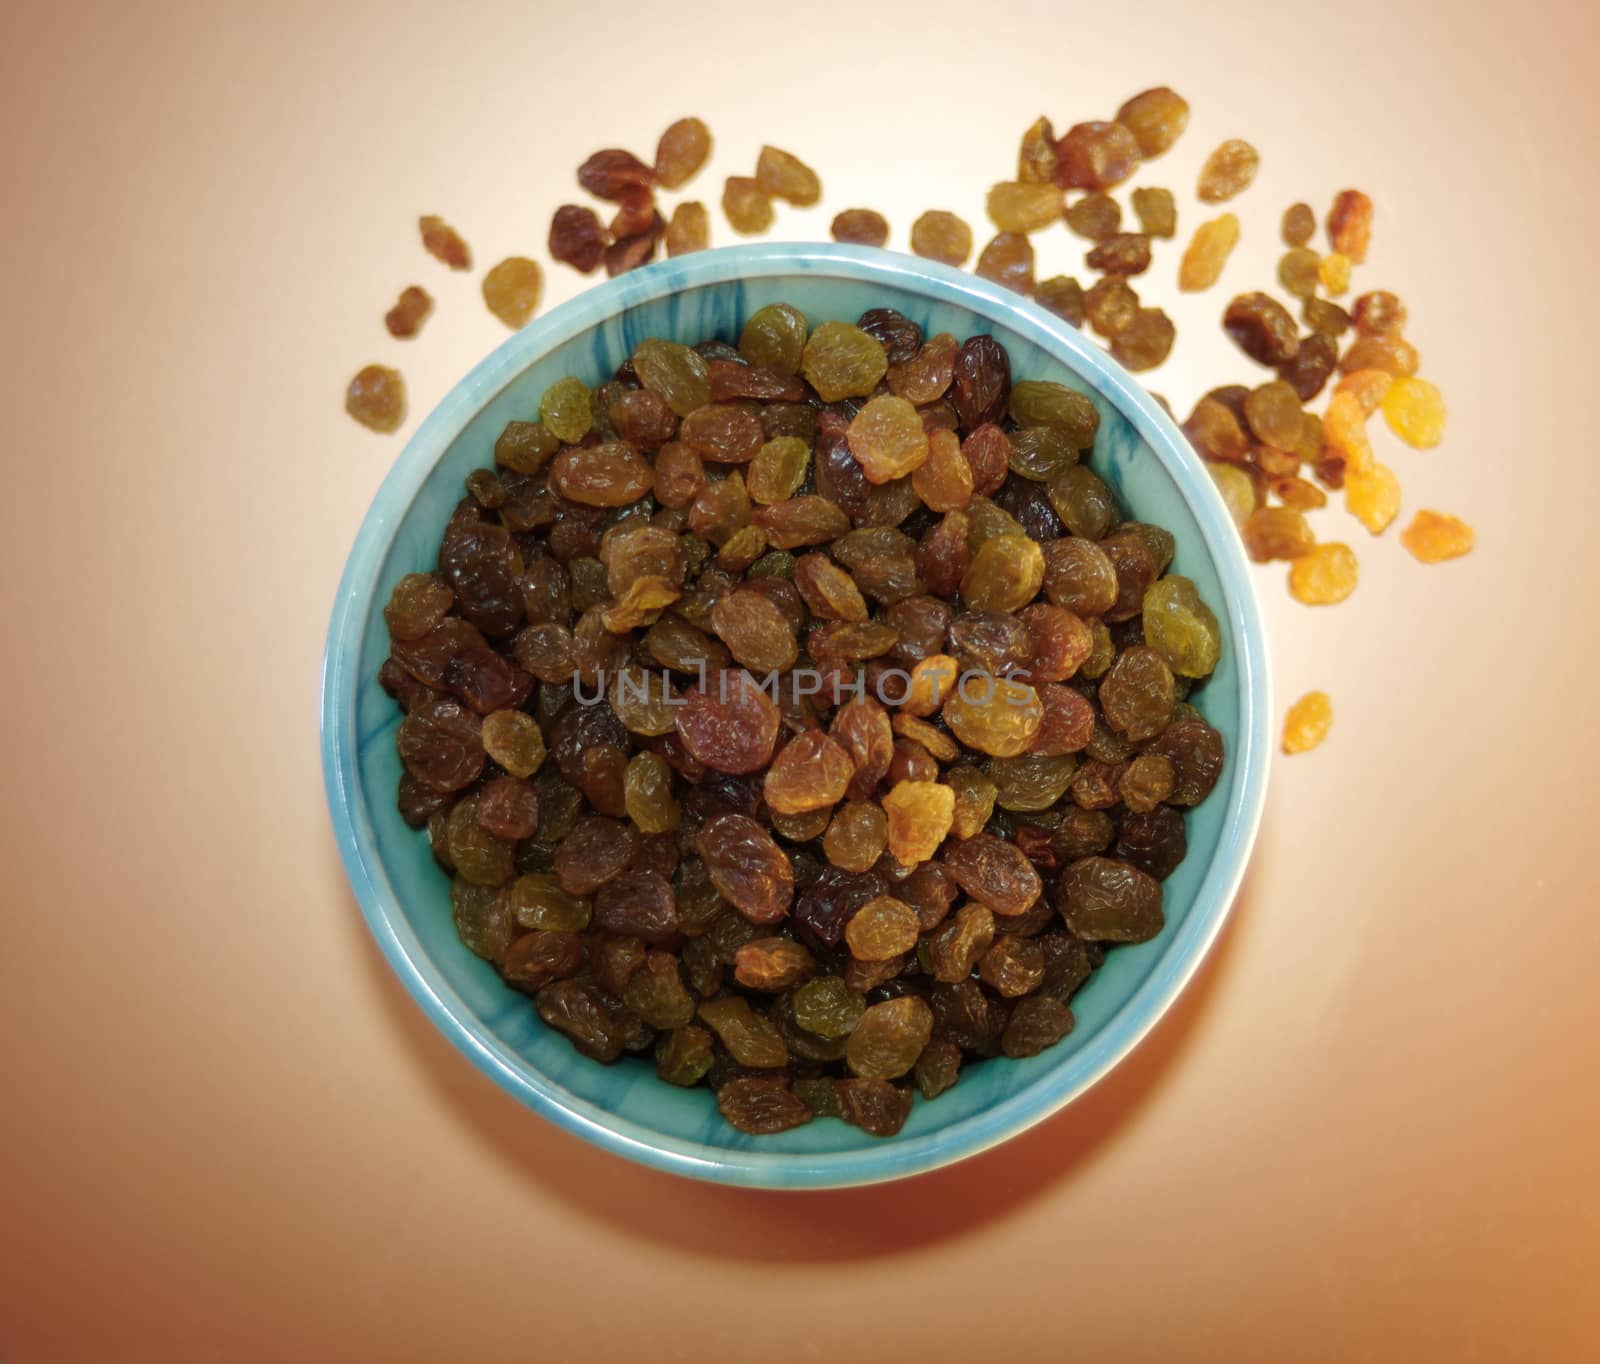 top view of a green plate with appetizing raisins on a light background